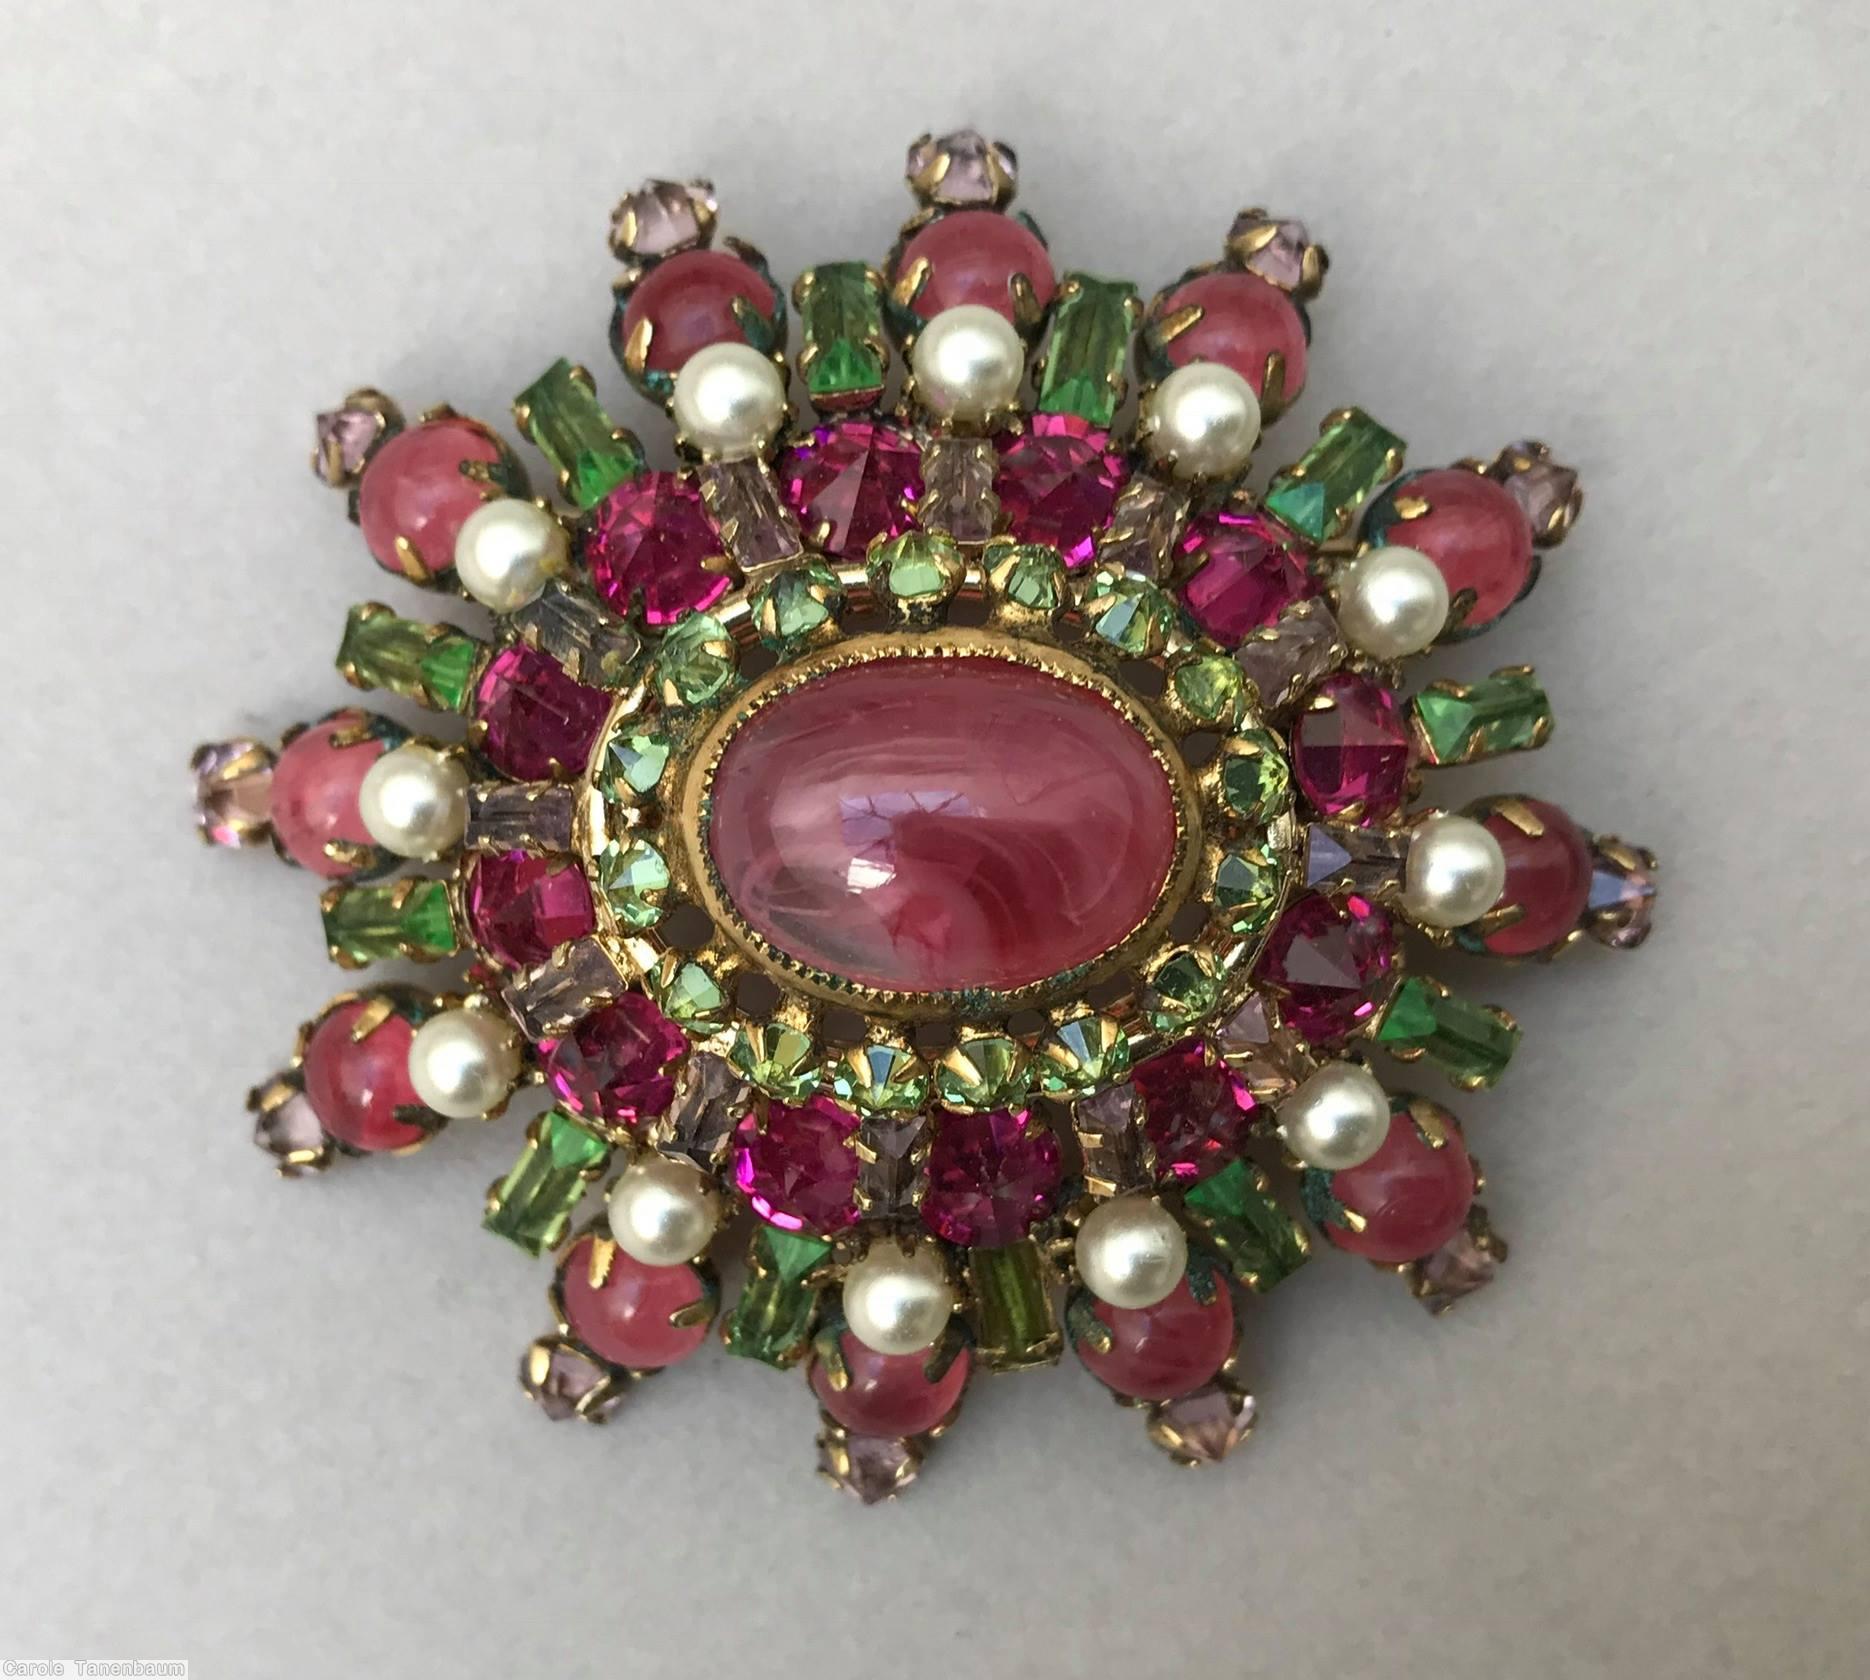 Schreiner 5 rounds varied length domed radial oval pin large oval center 16 small surrounding chaton small baguette fuchsia pink faux pearl green celery jewelry